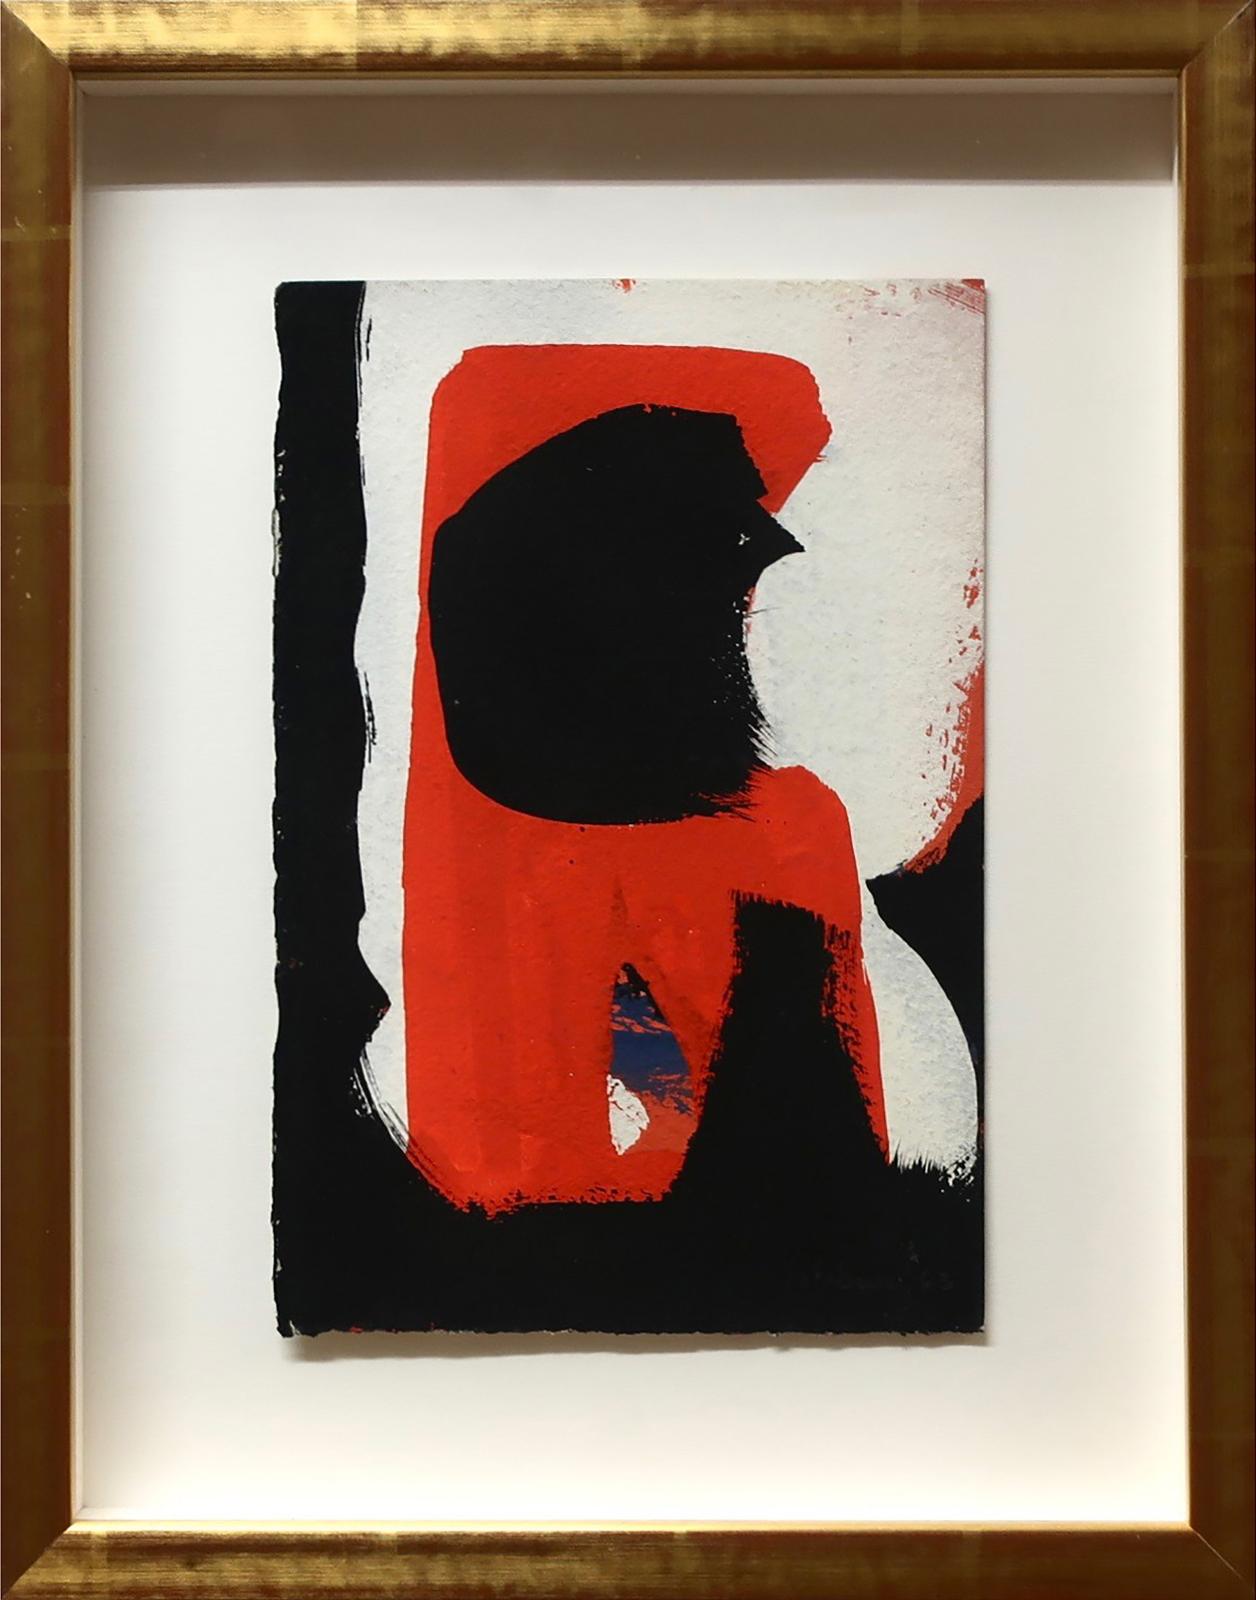 Jean LeFébure (1930-2013) - Untitled (Abstract - Red/White/Black)